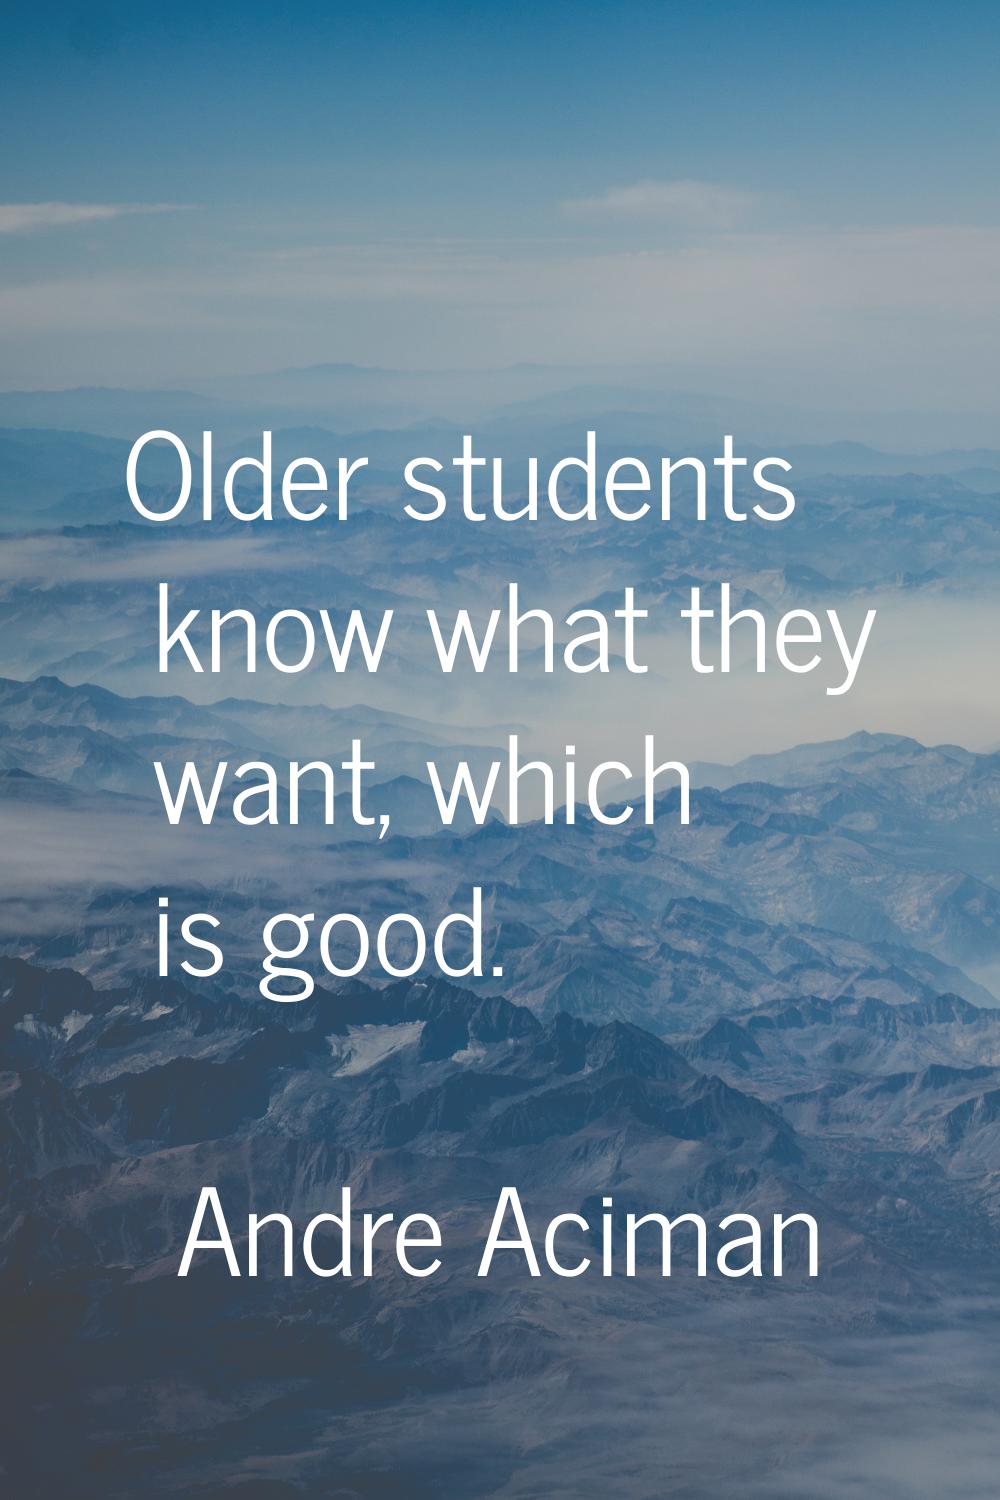 Older students know what they want, which is good.